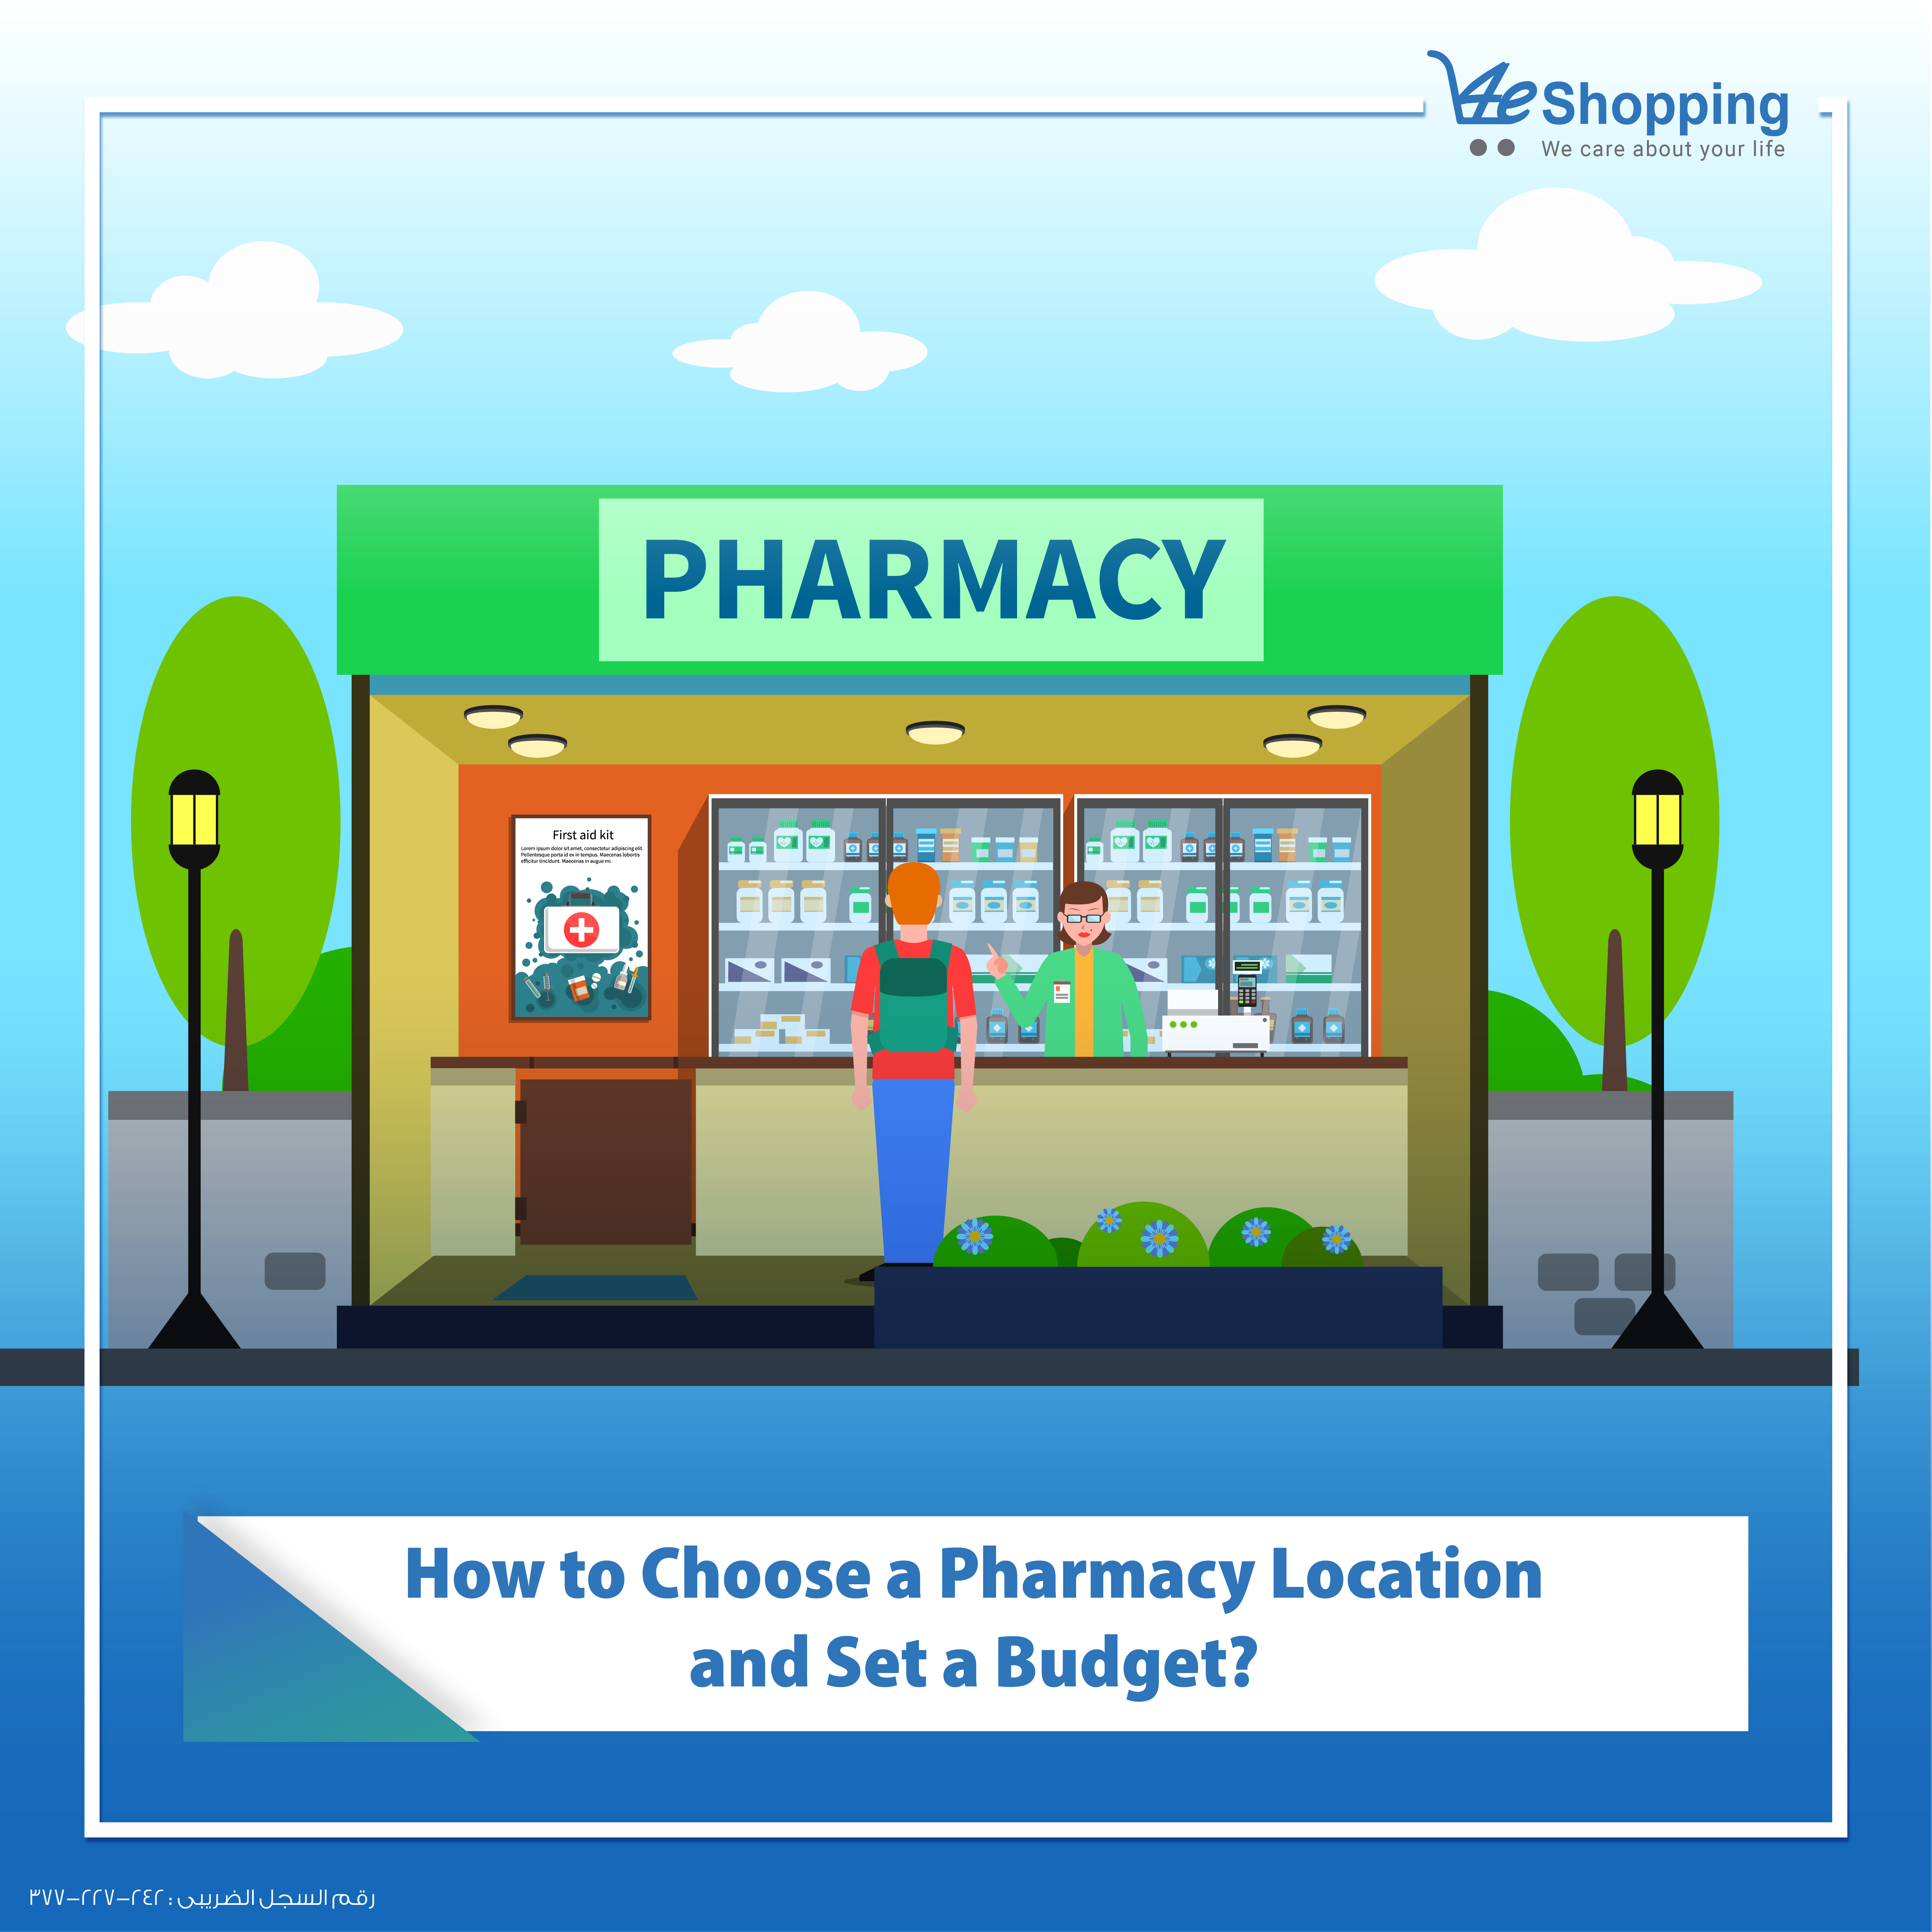 How to choose a pharmacy location and set a budget?